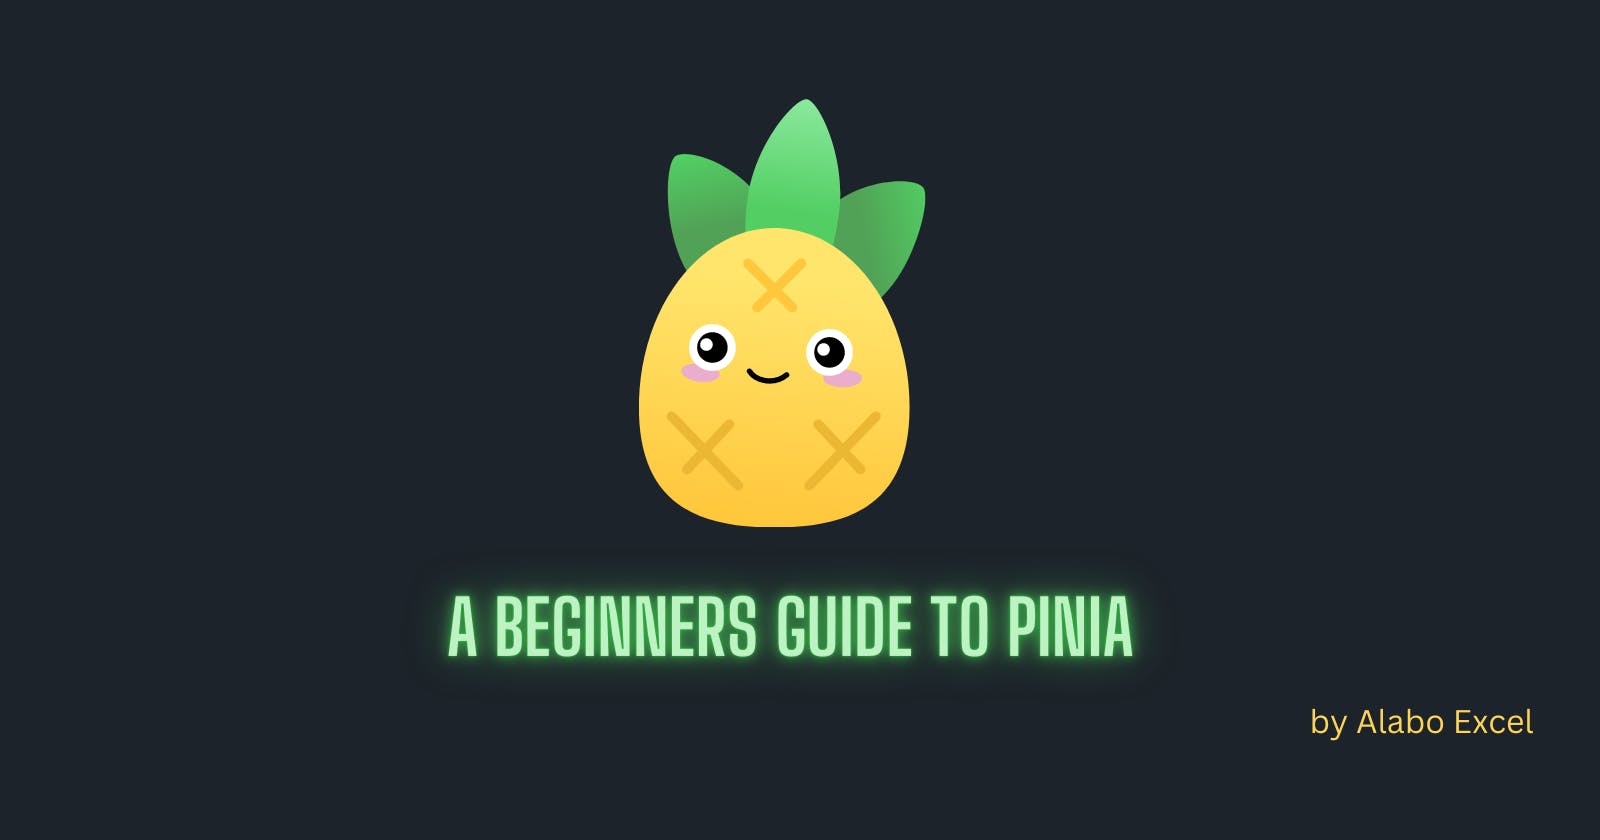 A Beginners Guide to Pinia